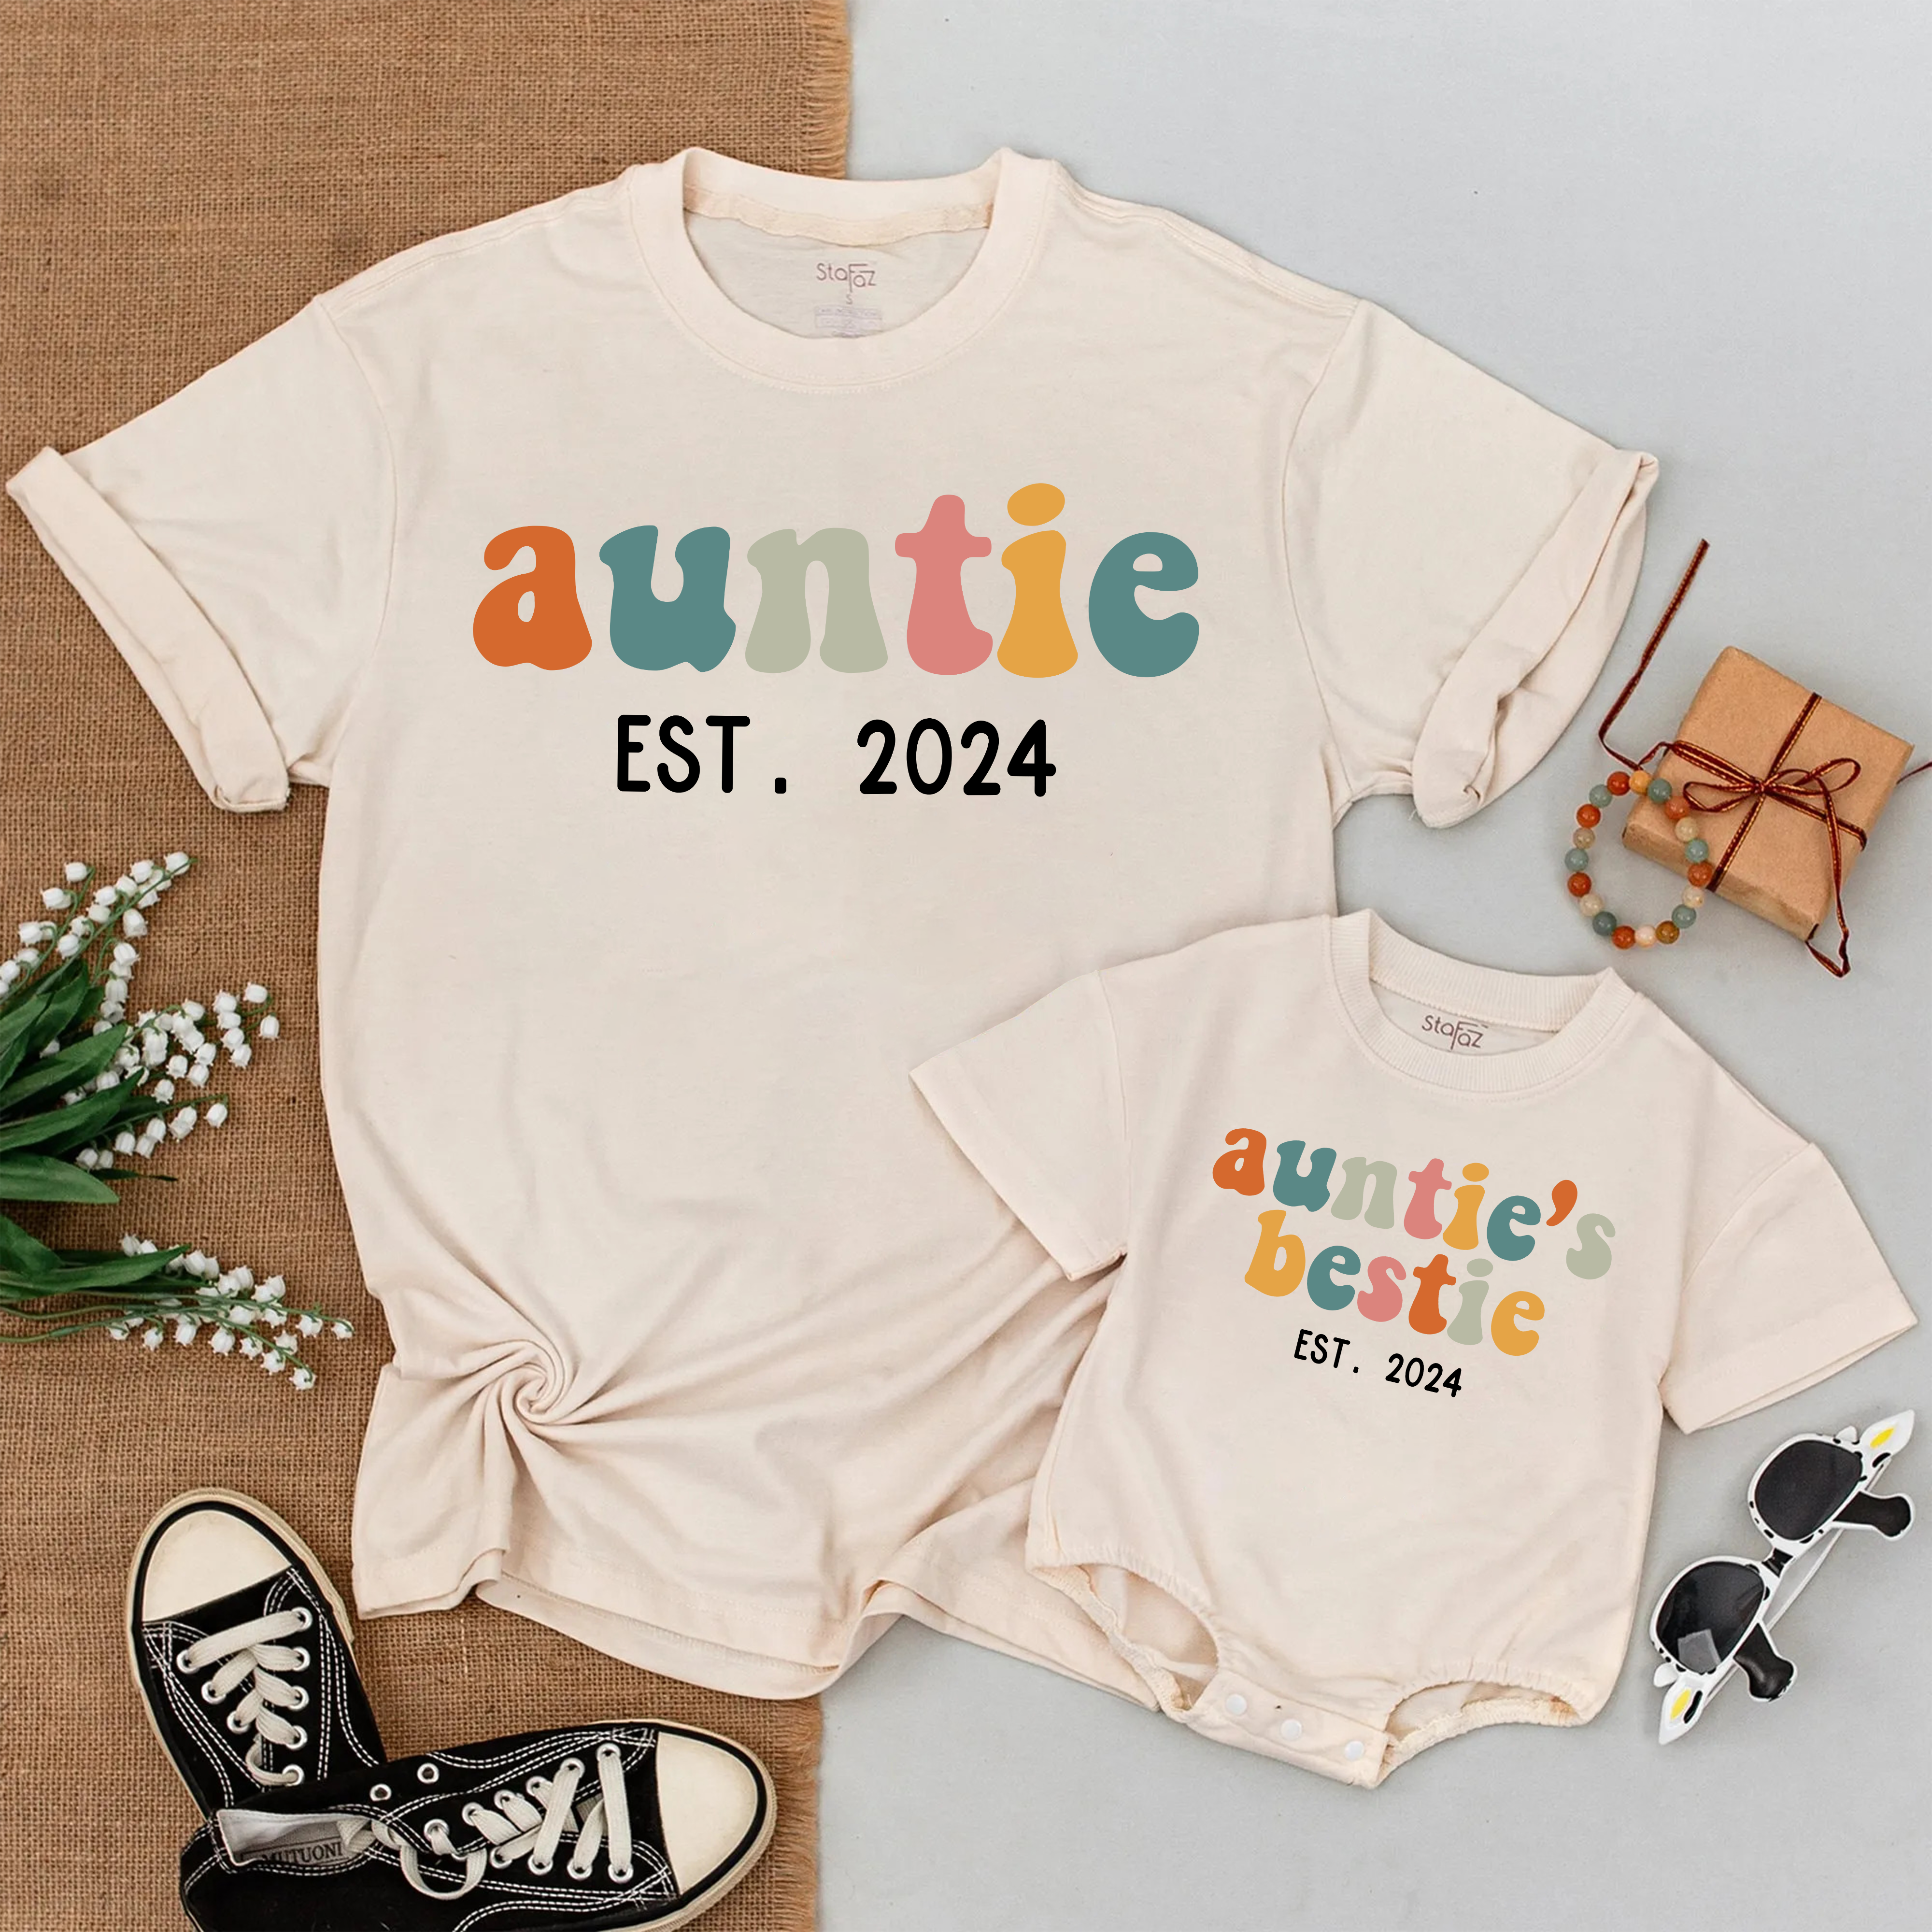 Auntie And Bestie EST 2024 Shirts: Custom Matching Family Outfit!